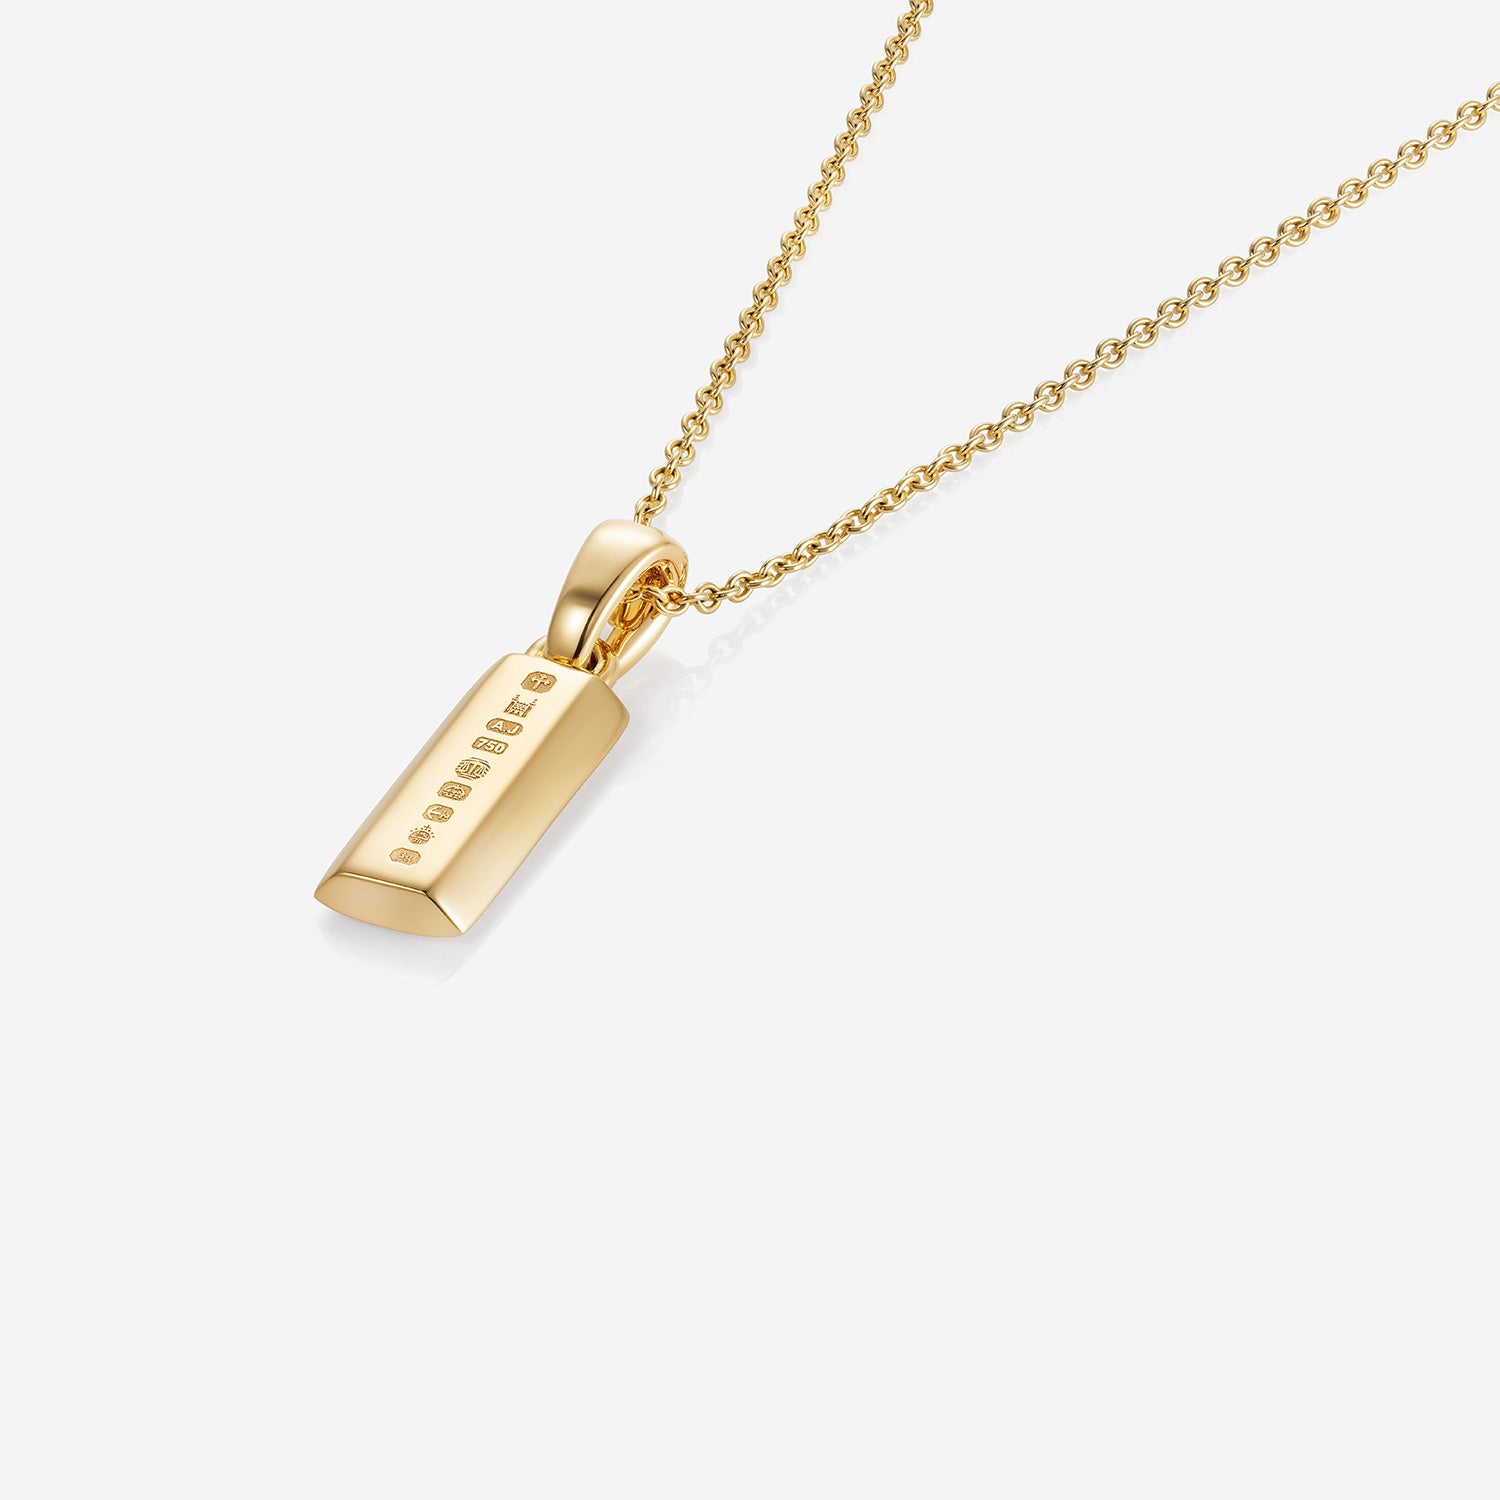 886 Small Bar Pendant with Chain in 18ct Yellow Gold – 886 Royal Mint